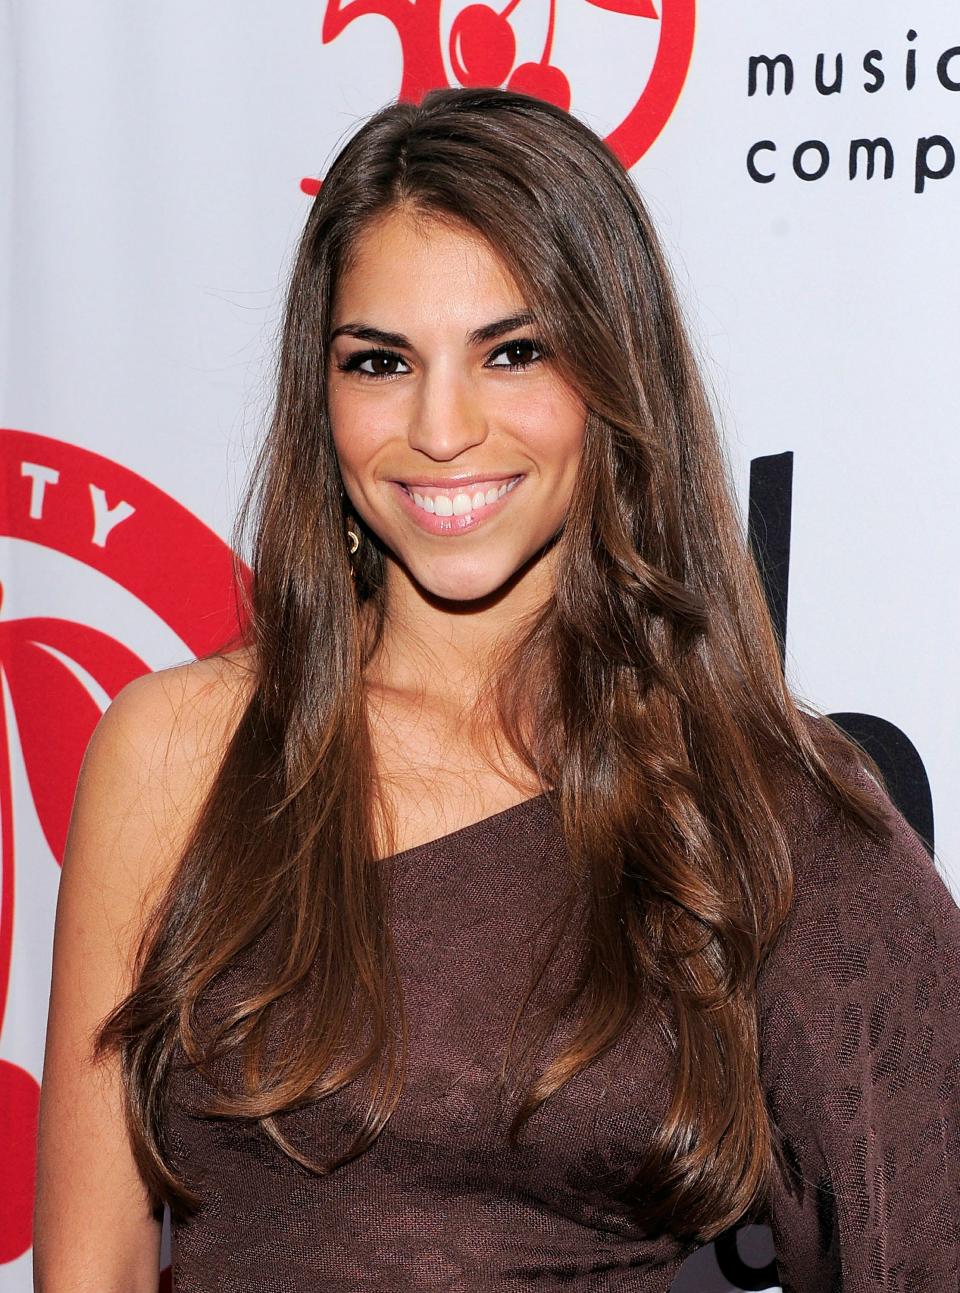 Former "American Idol" contestant Antonella Barba was arrested for distribution of heroin in New Jersey Thursday, according to the Norfolk Sheriff's Office. Here, the singer <br />poses on the red carpet at the Cherry Lane Music Publishing's 50th Anniversary celebration on May 19, 2010 in New York City.